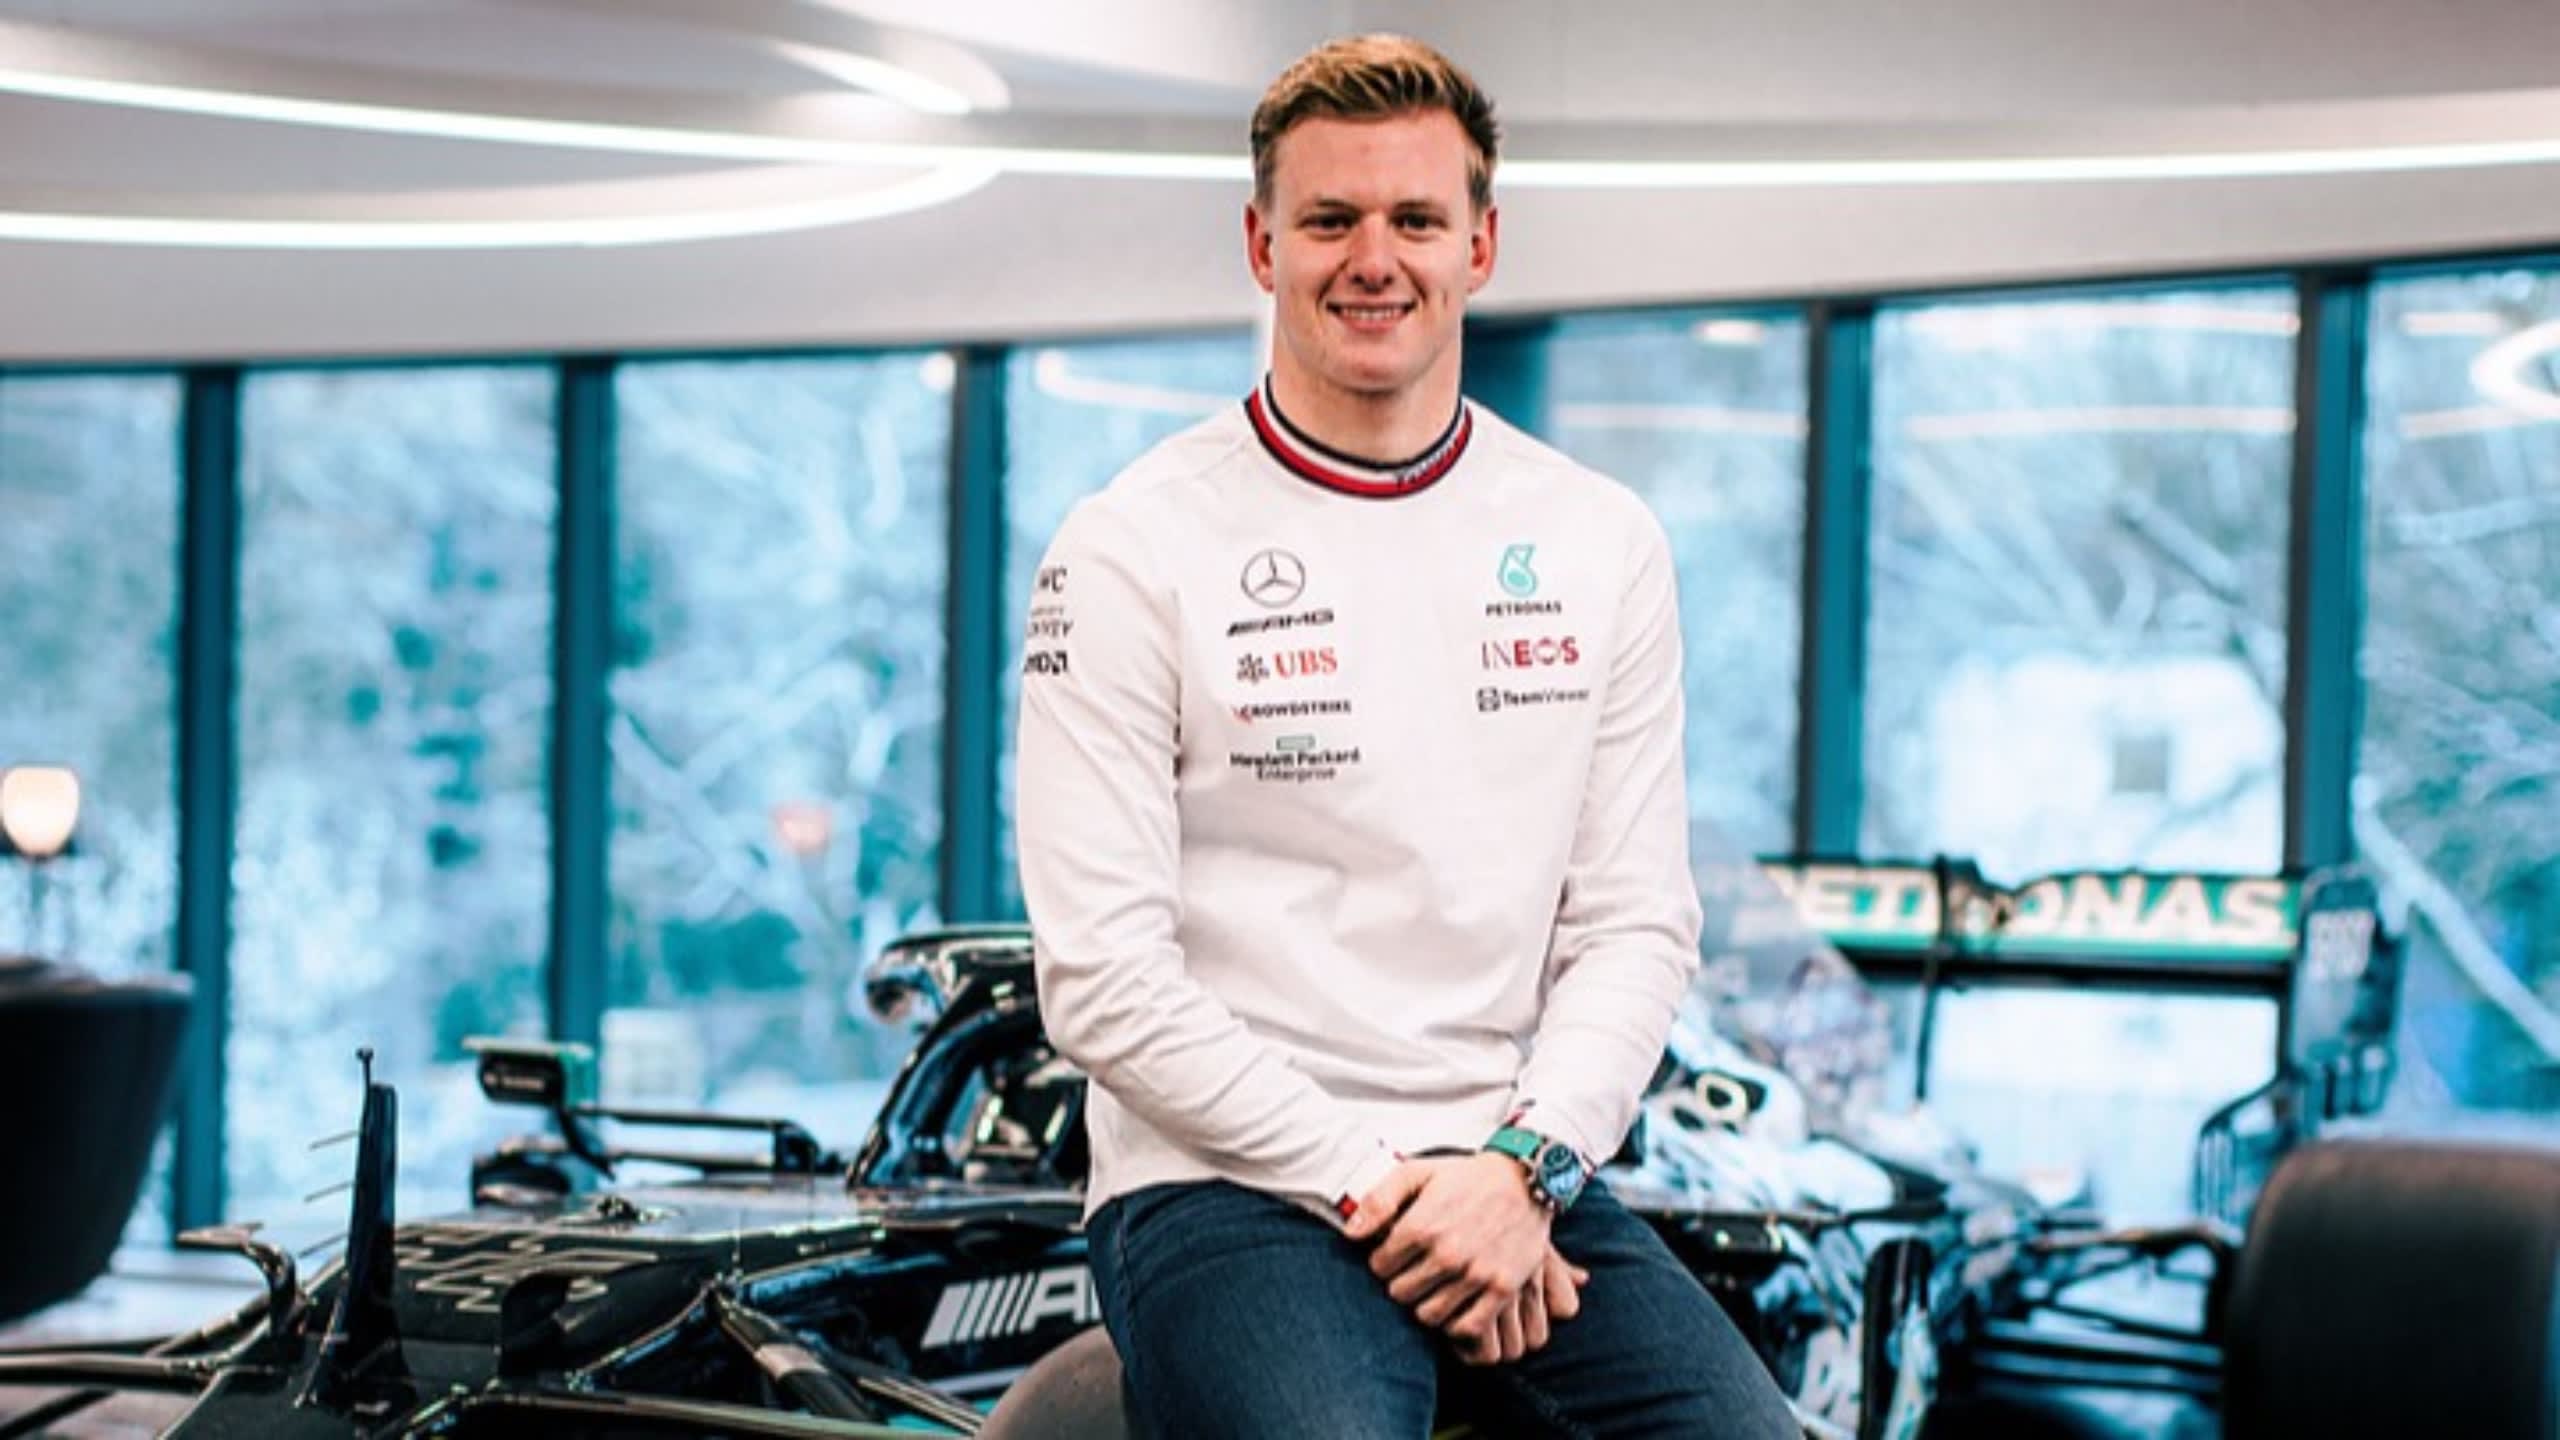 Mick Schumacher completes first Mercedes seat fit as he settles into